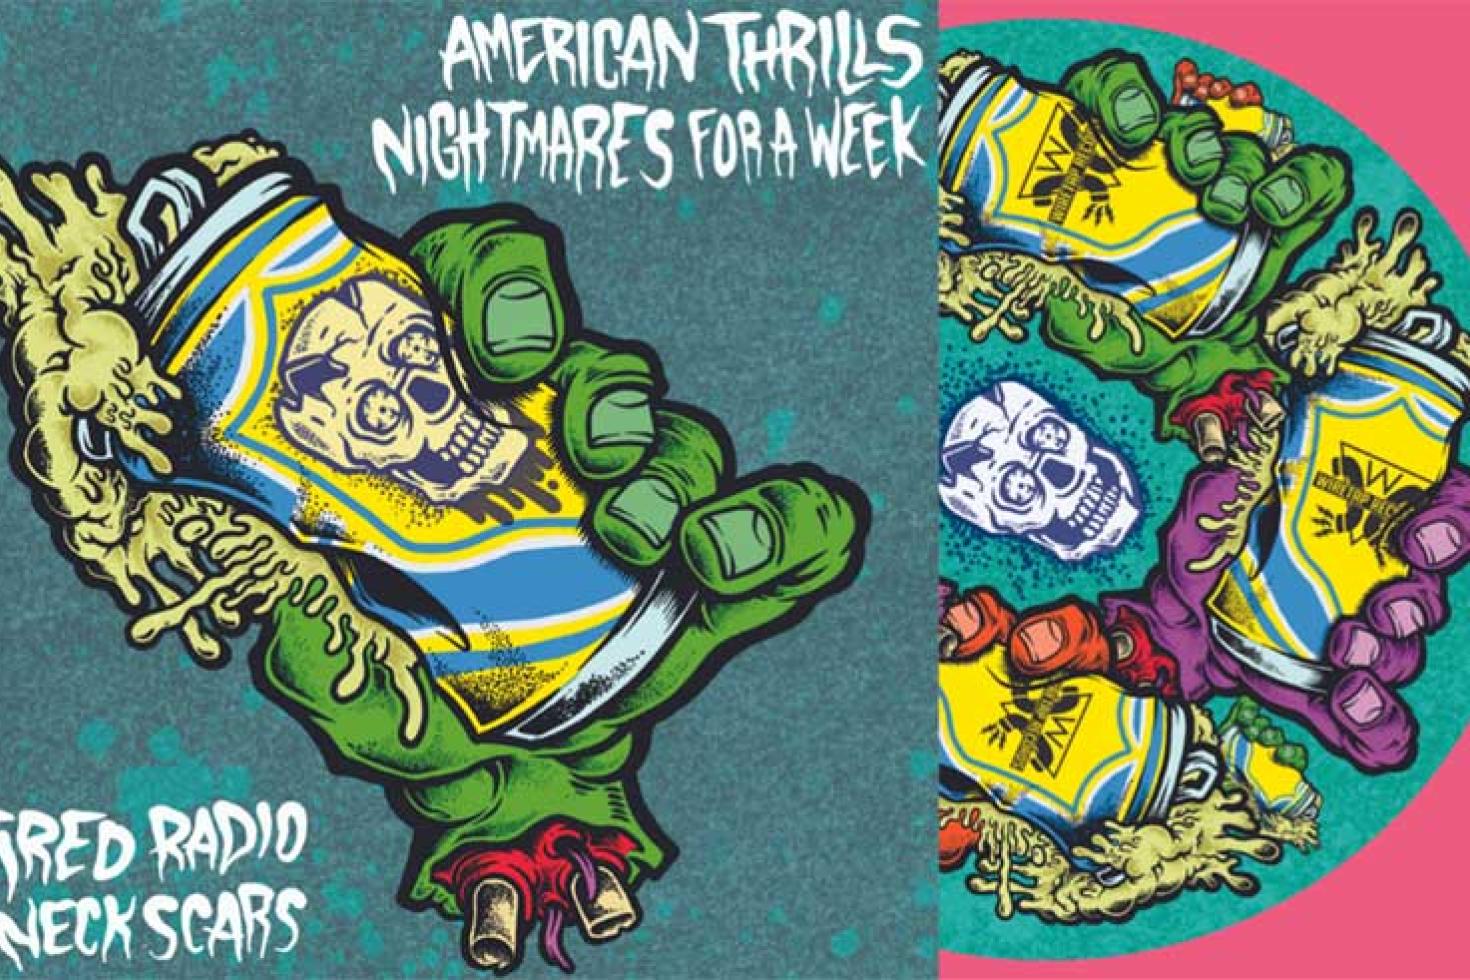 American Thrills, Tired Radio, Neckscars and Nightmares For A Week to release 4-way split